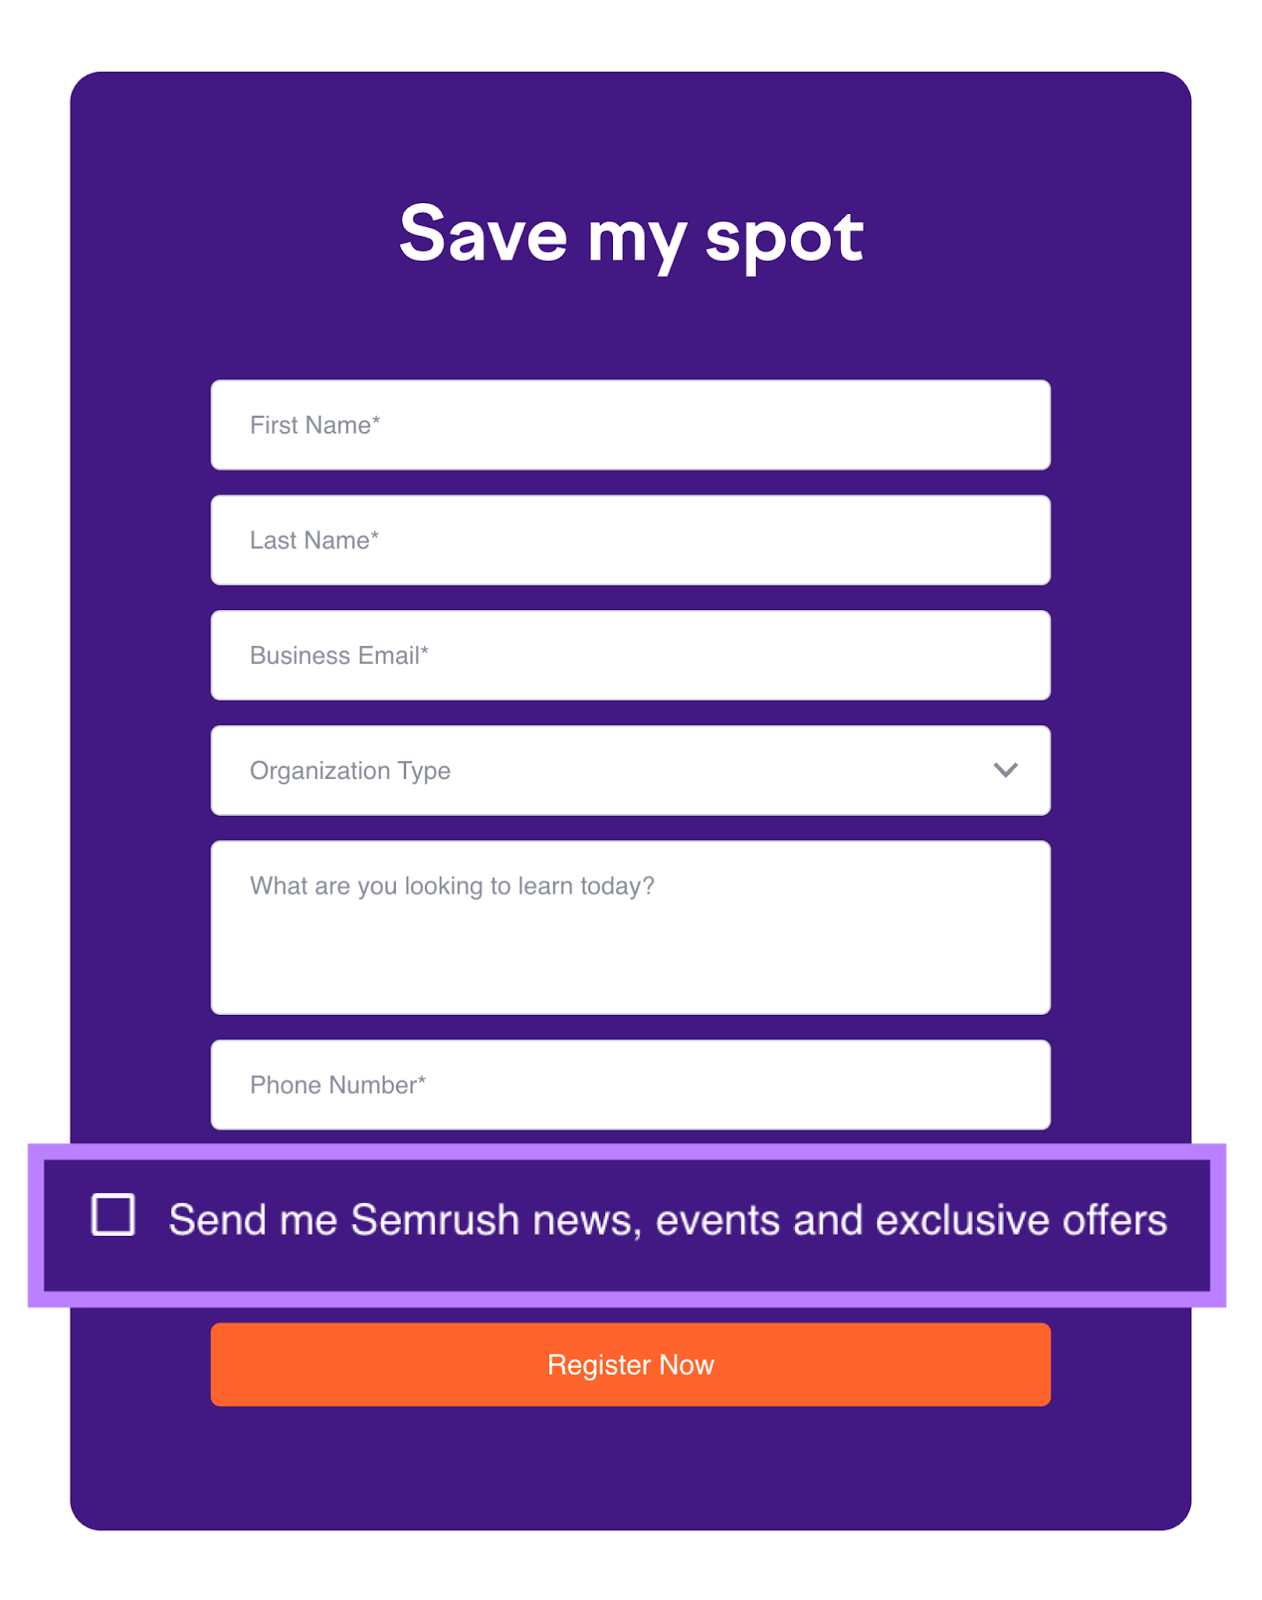 "Send me Semrush news, events and exclusive offers" checkbox in Semrush's opt-in form